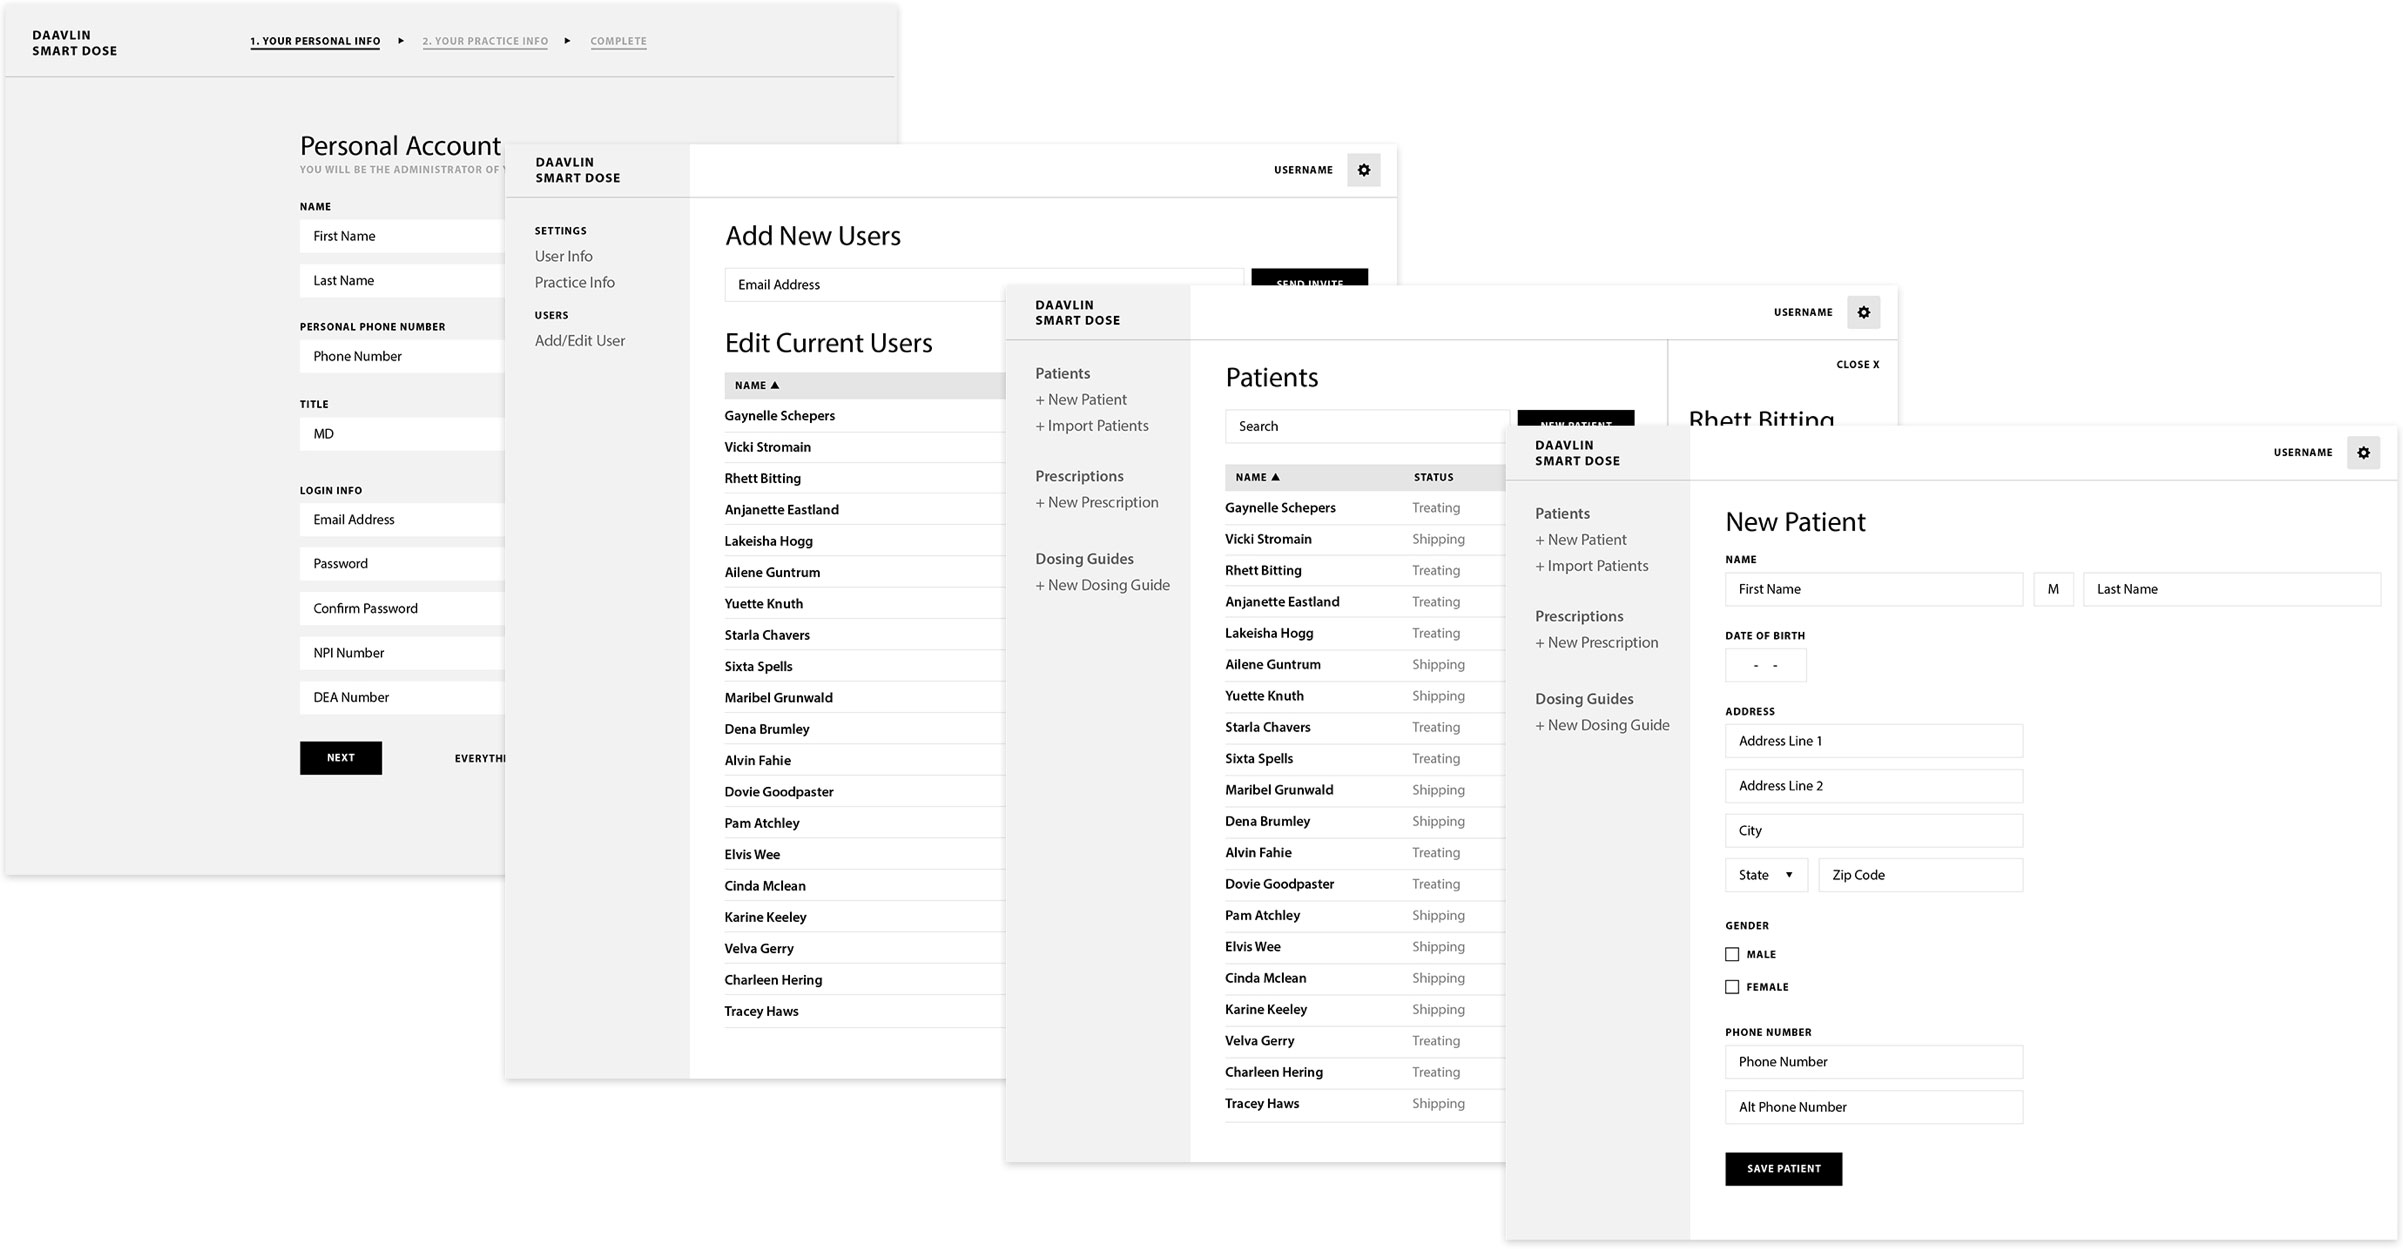 Wireframes detailing the user experience of the Daavlin app